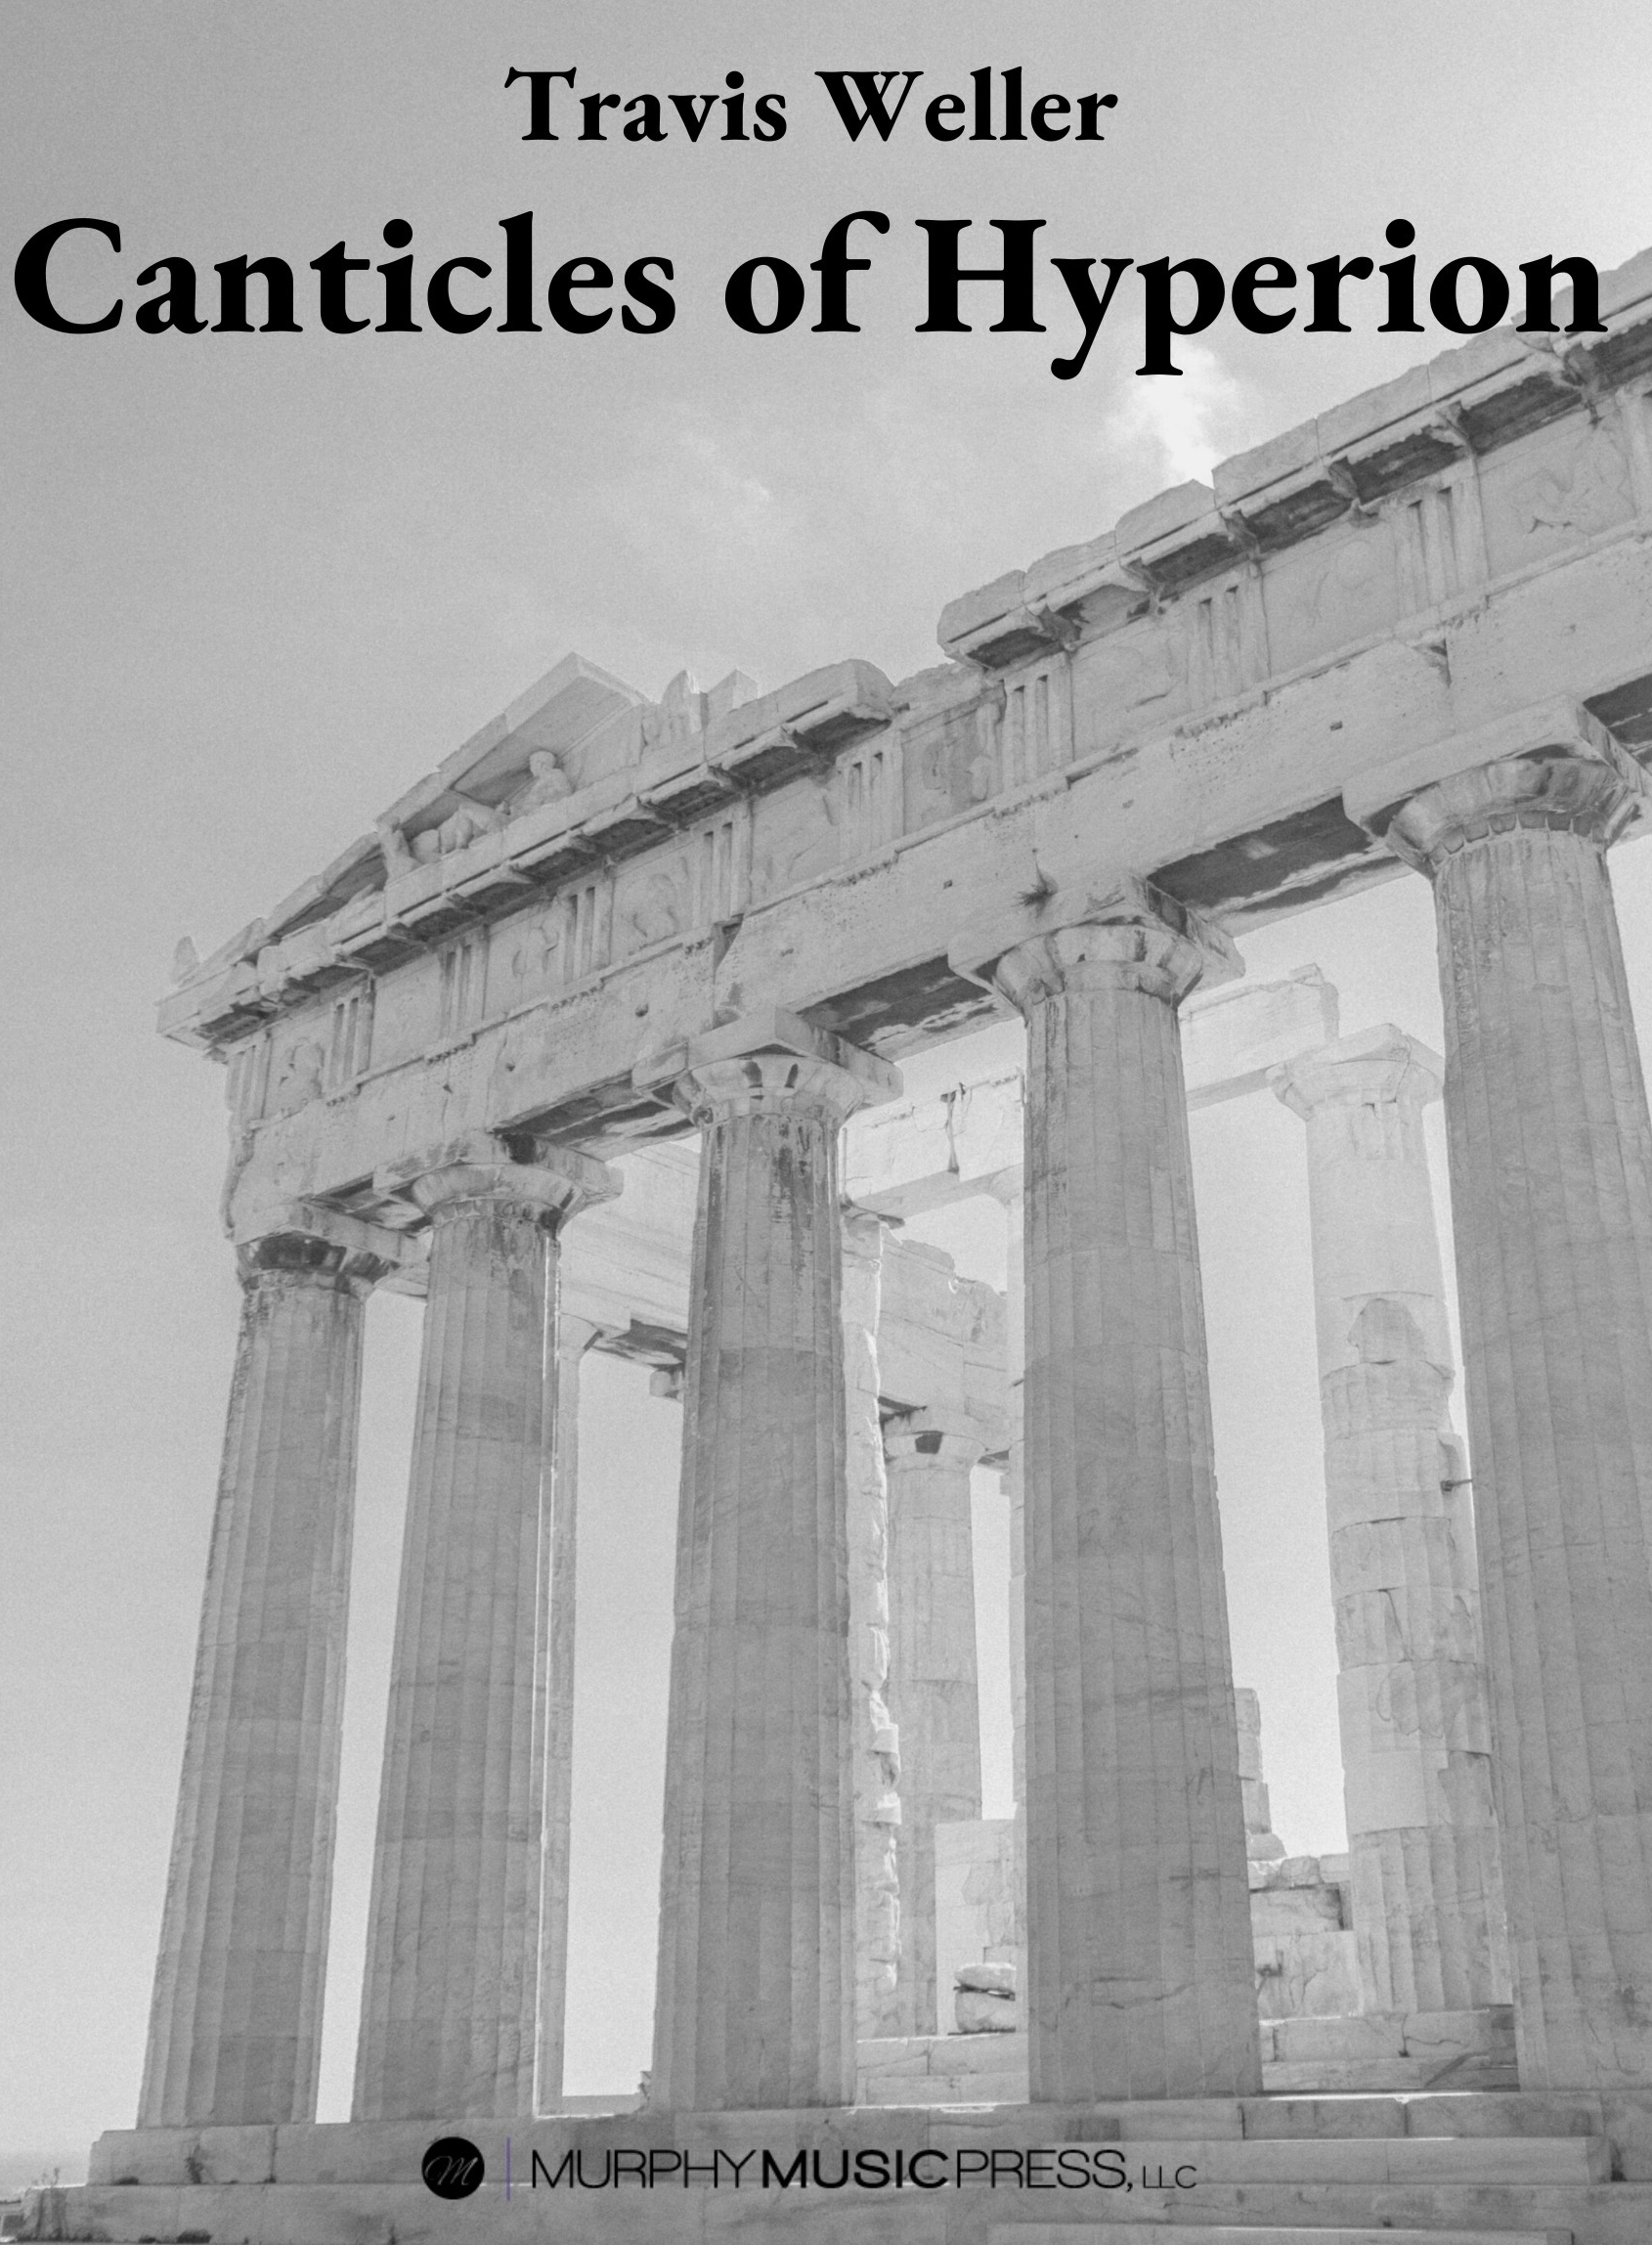 Canticles Of Hyperion by Travis Weller